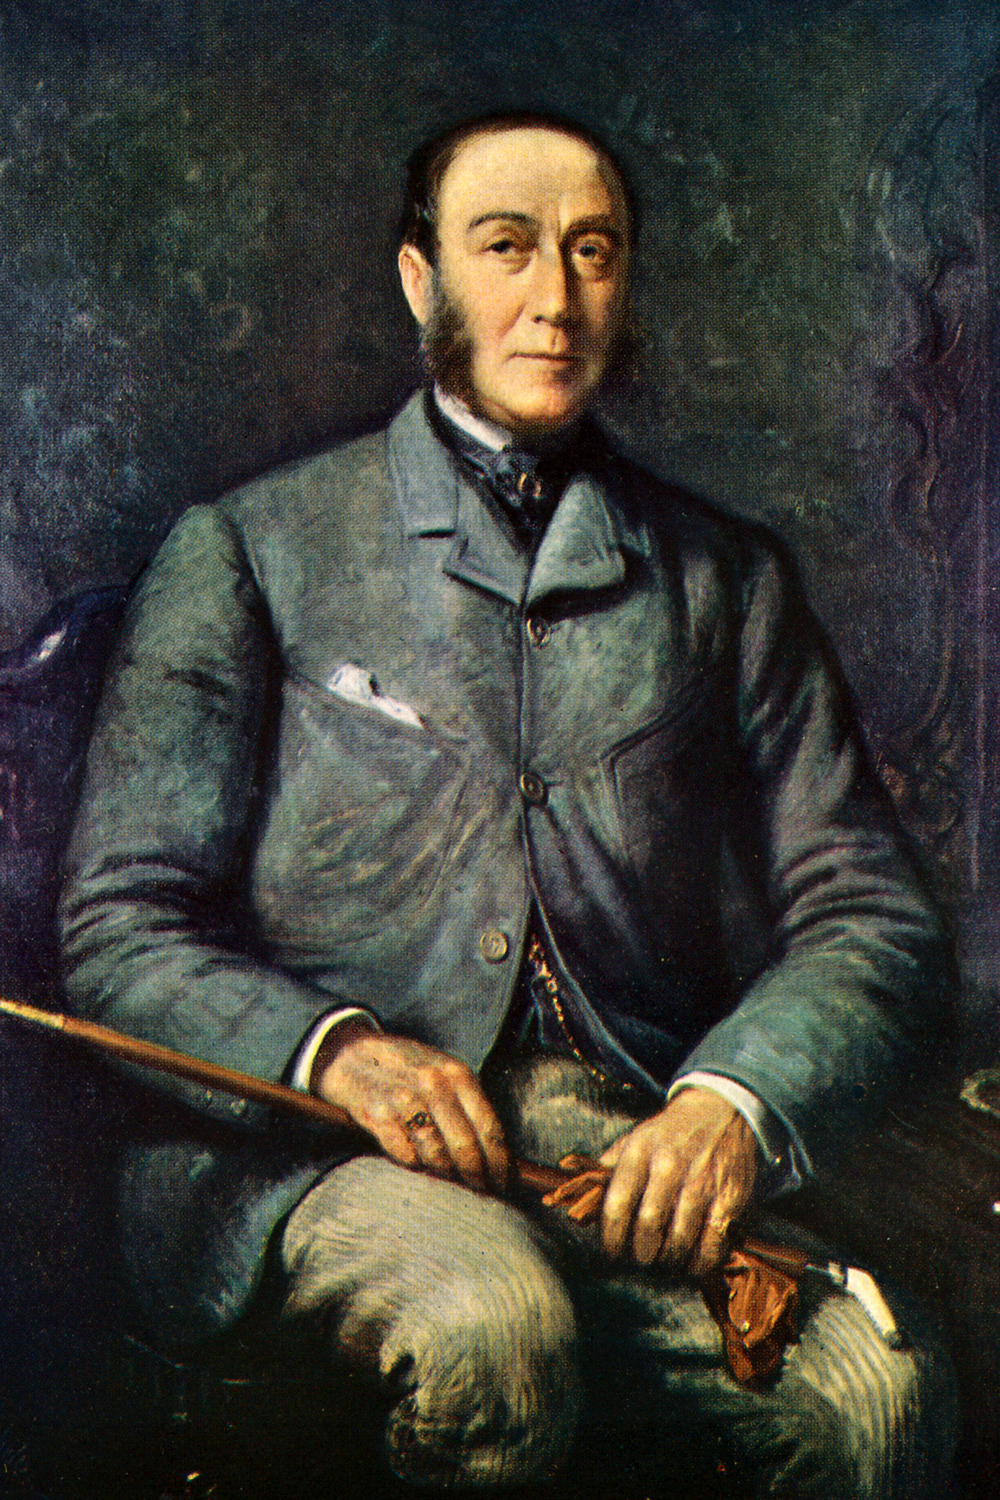 A painting of James Roosevelt